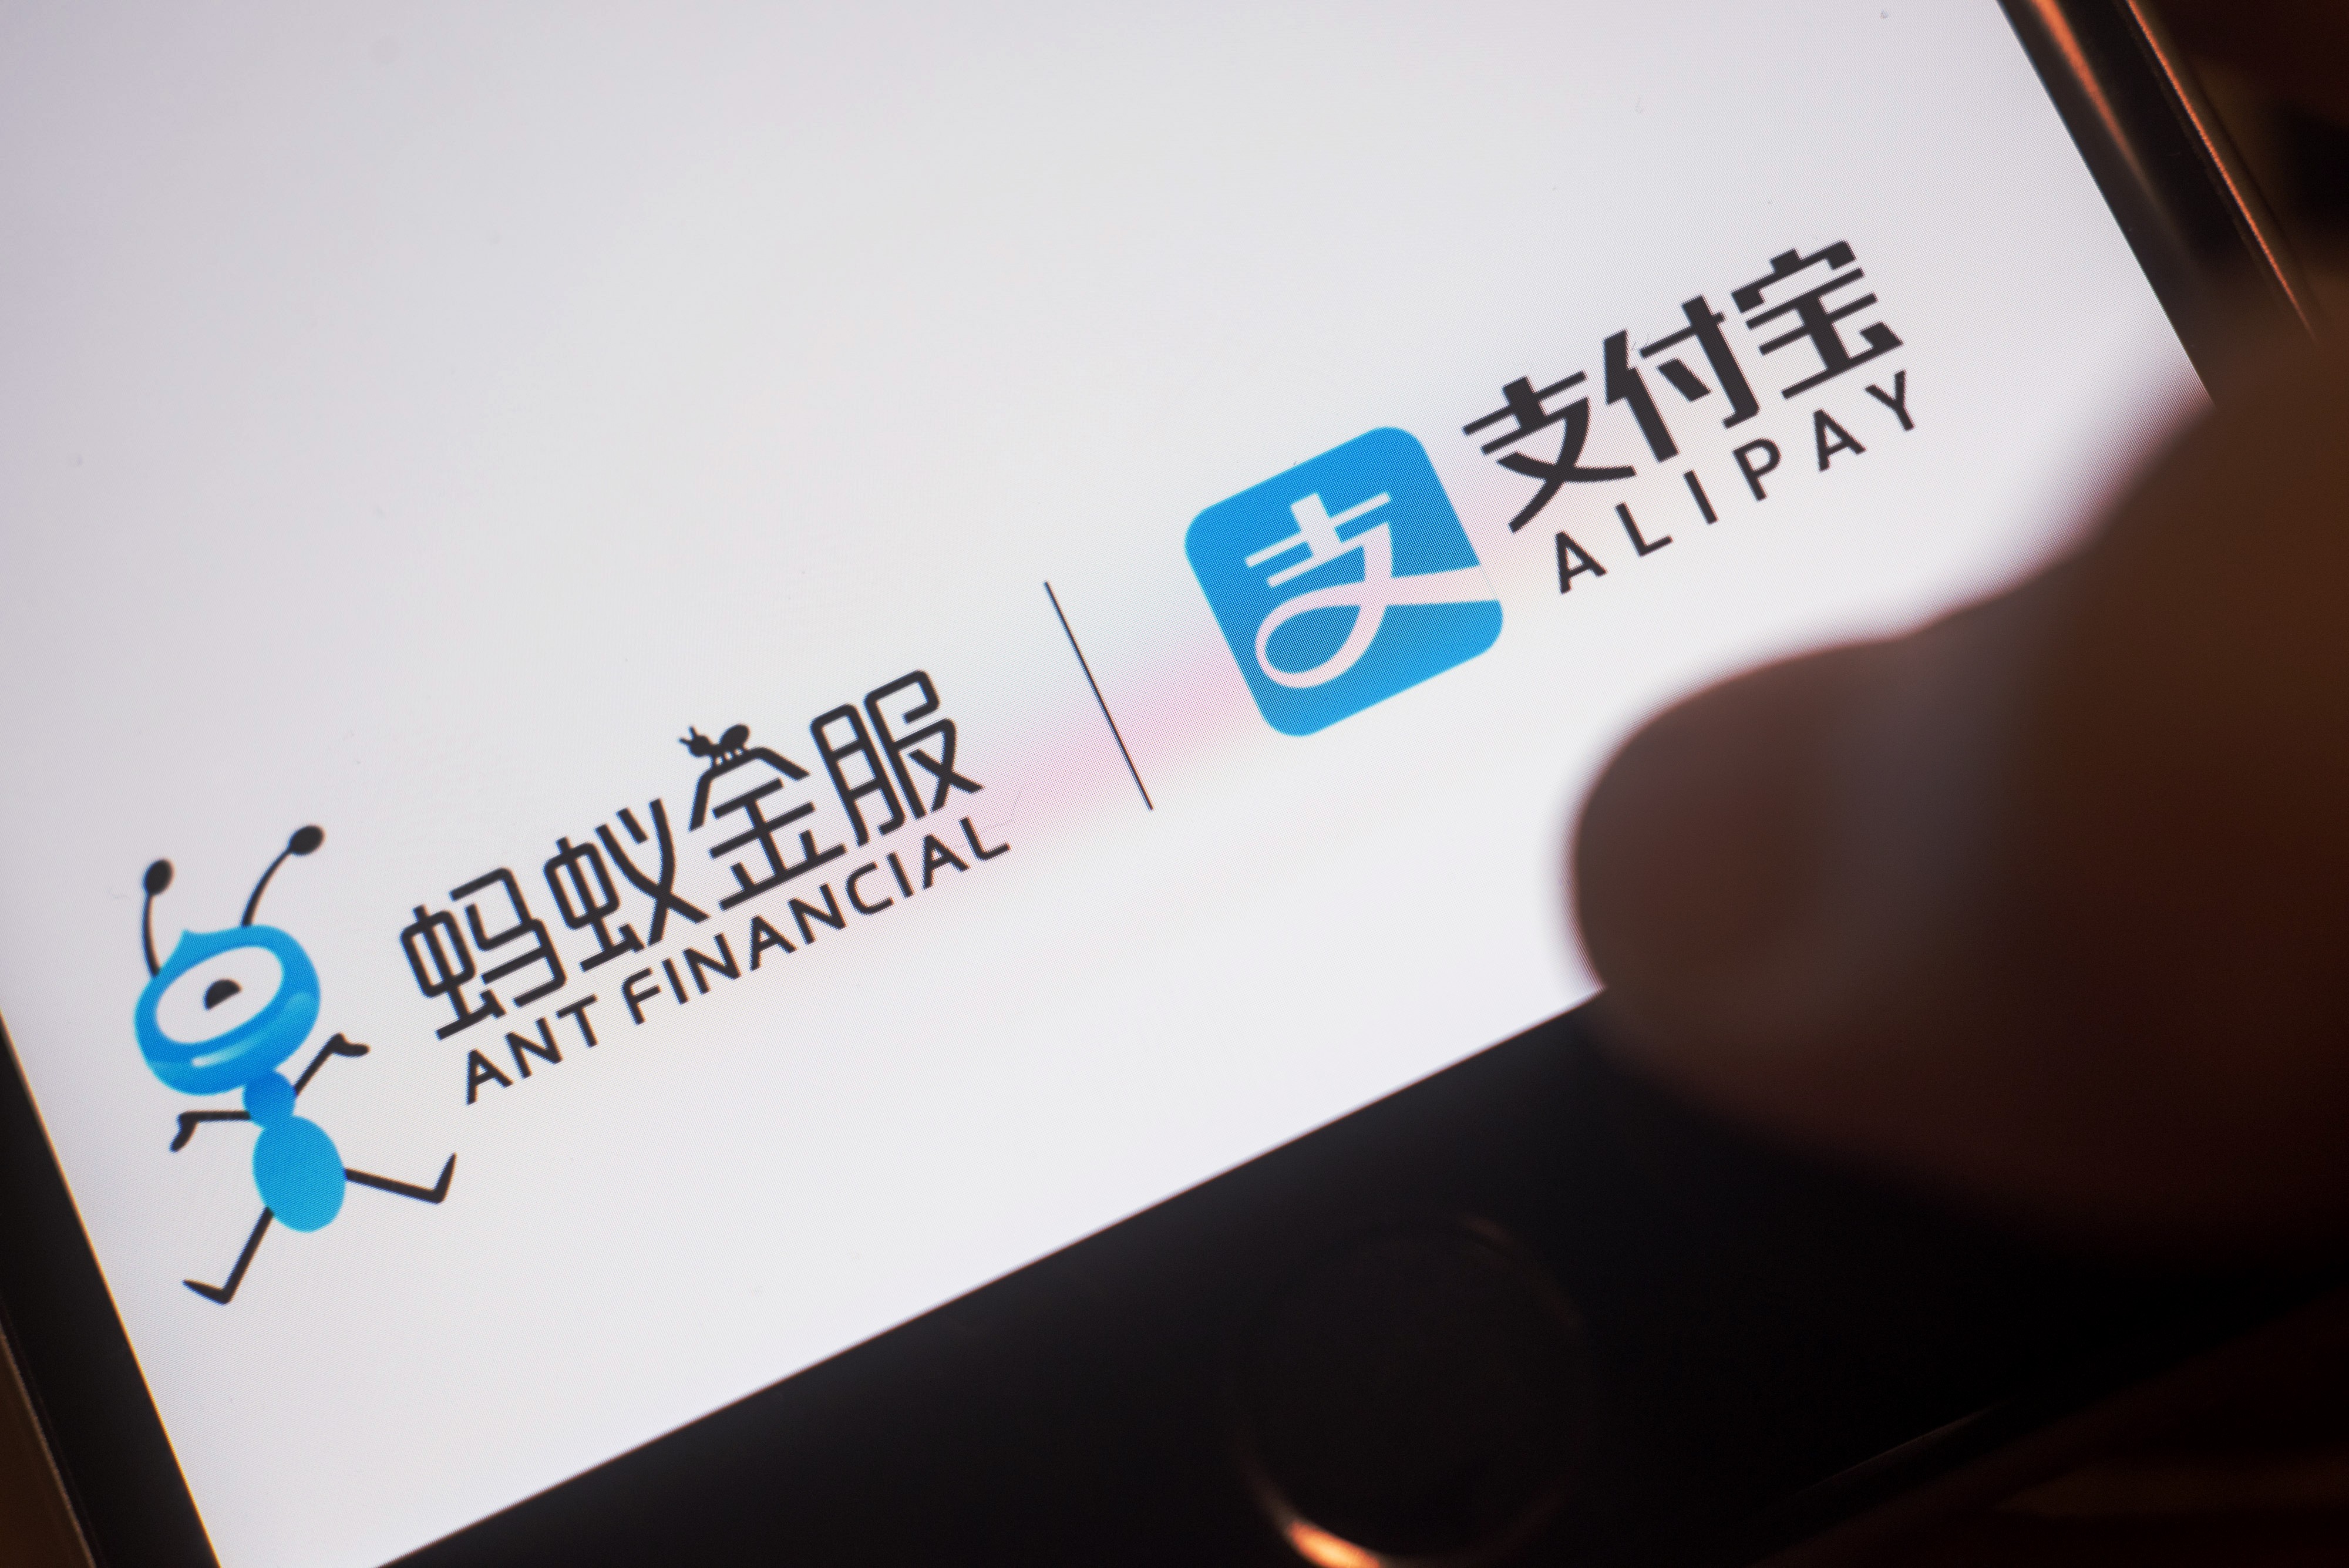 Ant Financial’s Ant Forest app has had a positive impact on reducing carbon emissions. Photo: Bloomberg